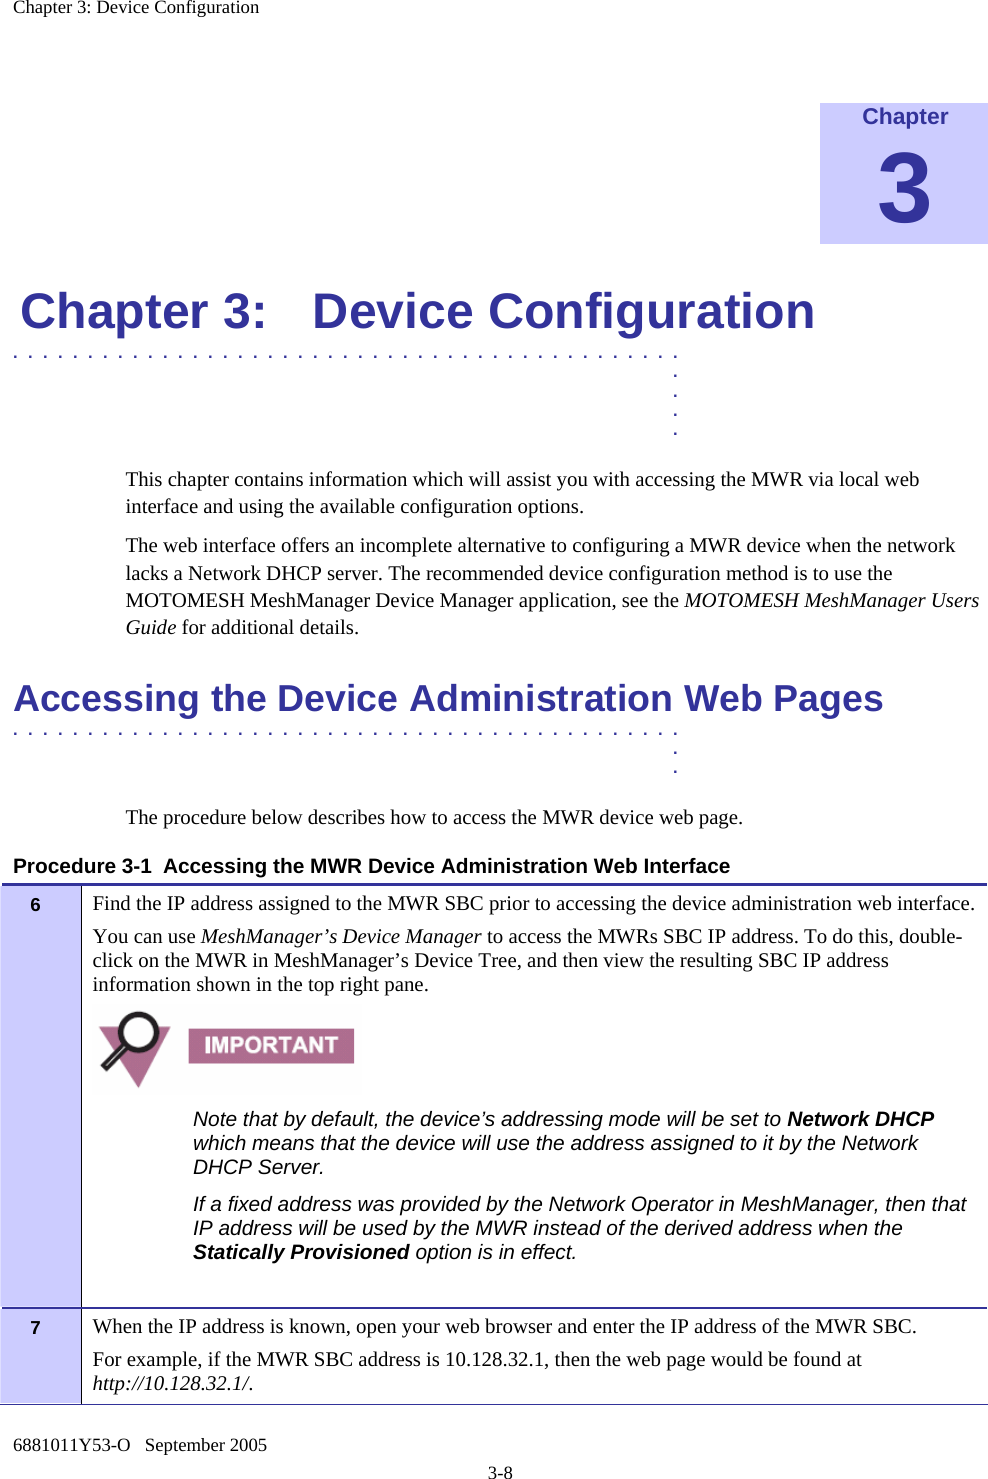 Chapter 3: Device Configuration 6881011Y53-O   September 2005 3-8  Chapter 3 Chapter 3:  Device Configuration .............................................  .  .  .  . This chapter contains information which will assist you with accessing the MWR via local web interface and using the available configuration options.  The web interface offers an incomplete alternative to configuring a MWR device when the network lacks a Network DHCP server. The recommended device configuration method is to use the MOTOMESH MeshManager Device Manager application, see the MOTOMESH MeshManager Users Guide for additional details. Accessing the Device Administration Web Pages .............................................  .  . The procedure below describes how to access the MWR device web page. Procedure 3-1  Accessing the MWR Device Administration Web Interface 6   Find the IP address assigned to the MWR SBC prior to accessing the device administration web interface. You can use MeshManager’s Device Manager to access the MWRs SBC IP address. To do this, double-click on the MWR in MeshManager’s Device Tree, and then view the resulting SBC IP address information shown in the top right pane.  Note that by default, the device’s addressing mode will be set to Network DHCP which means that the device will use the address assigned to it by the Network DHCP Server. If a fixed address was provided by the Network Operator in MeshManager, then that IP address will be used by the MWR instead of the derived address when the Statically Provisioned option is in effect.  7   When the IP address is known, open your web browser and enter the IP address of the MWR SBC.  For example, if the MWR SBC address is 10.128.32.1, then the web page would be found at http://10.128.32.1/. 